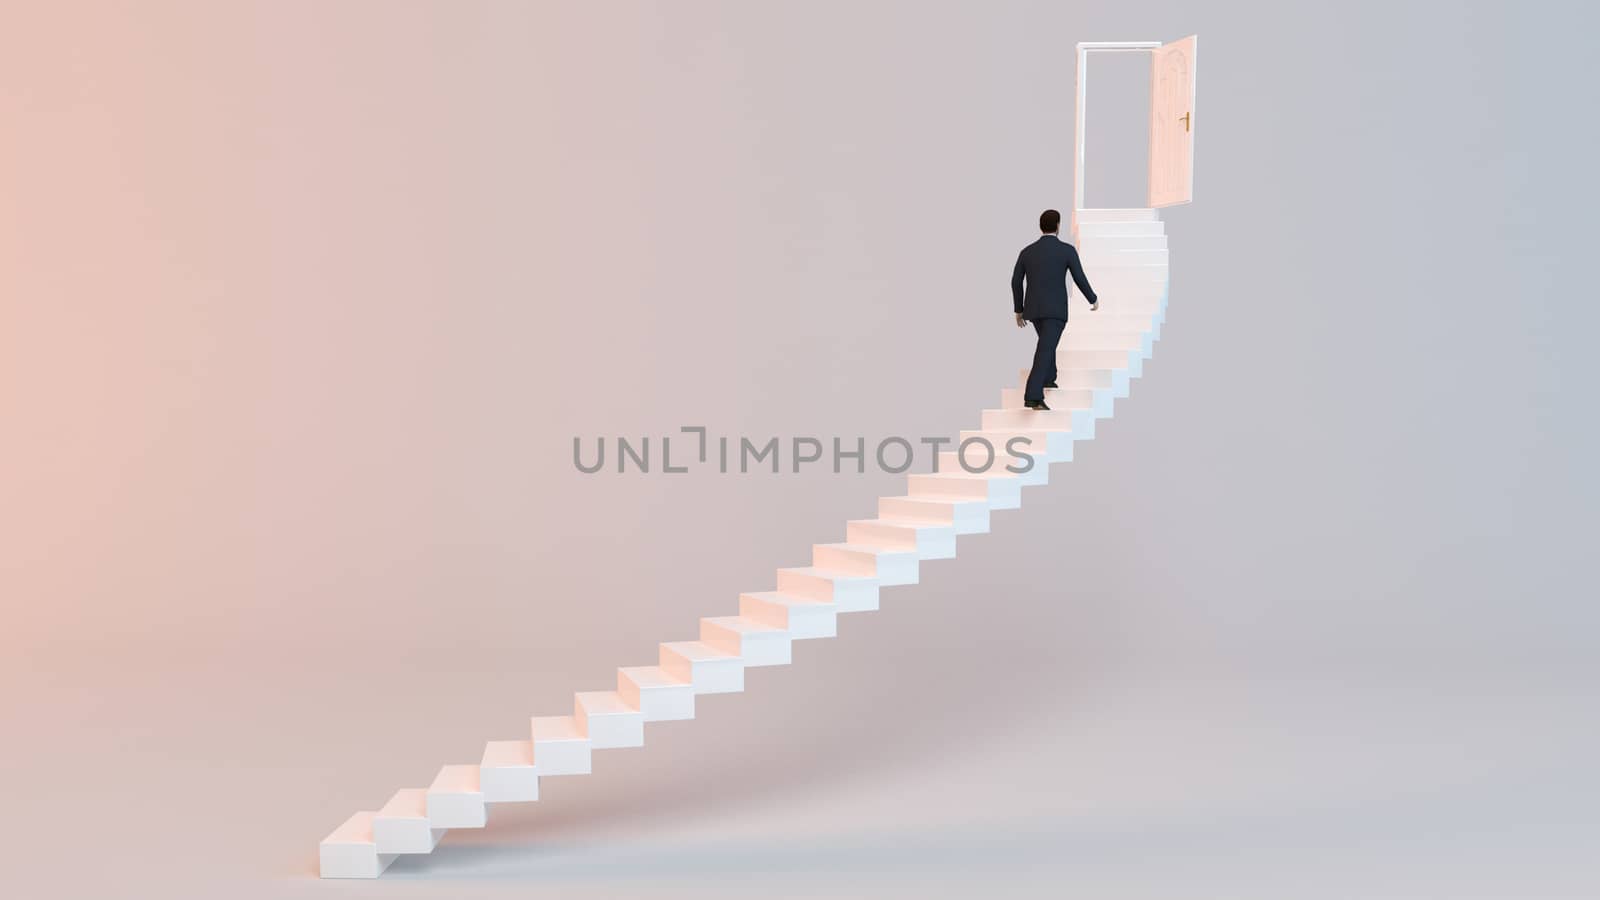 3D character goes on the stairs to reach the goal or arrive to his destination